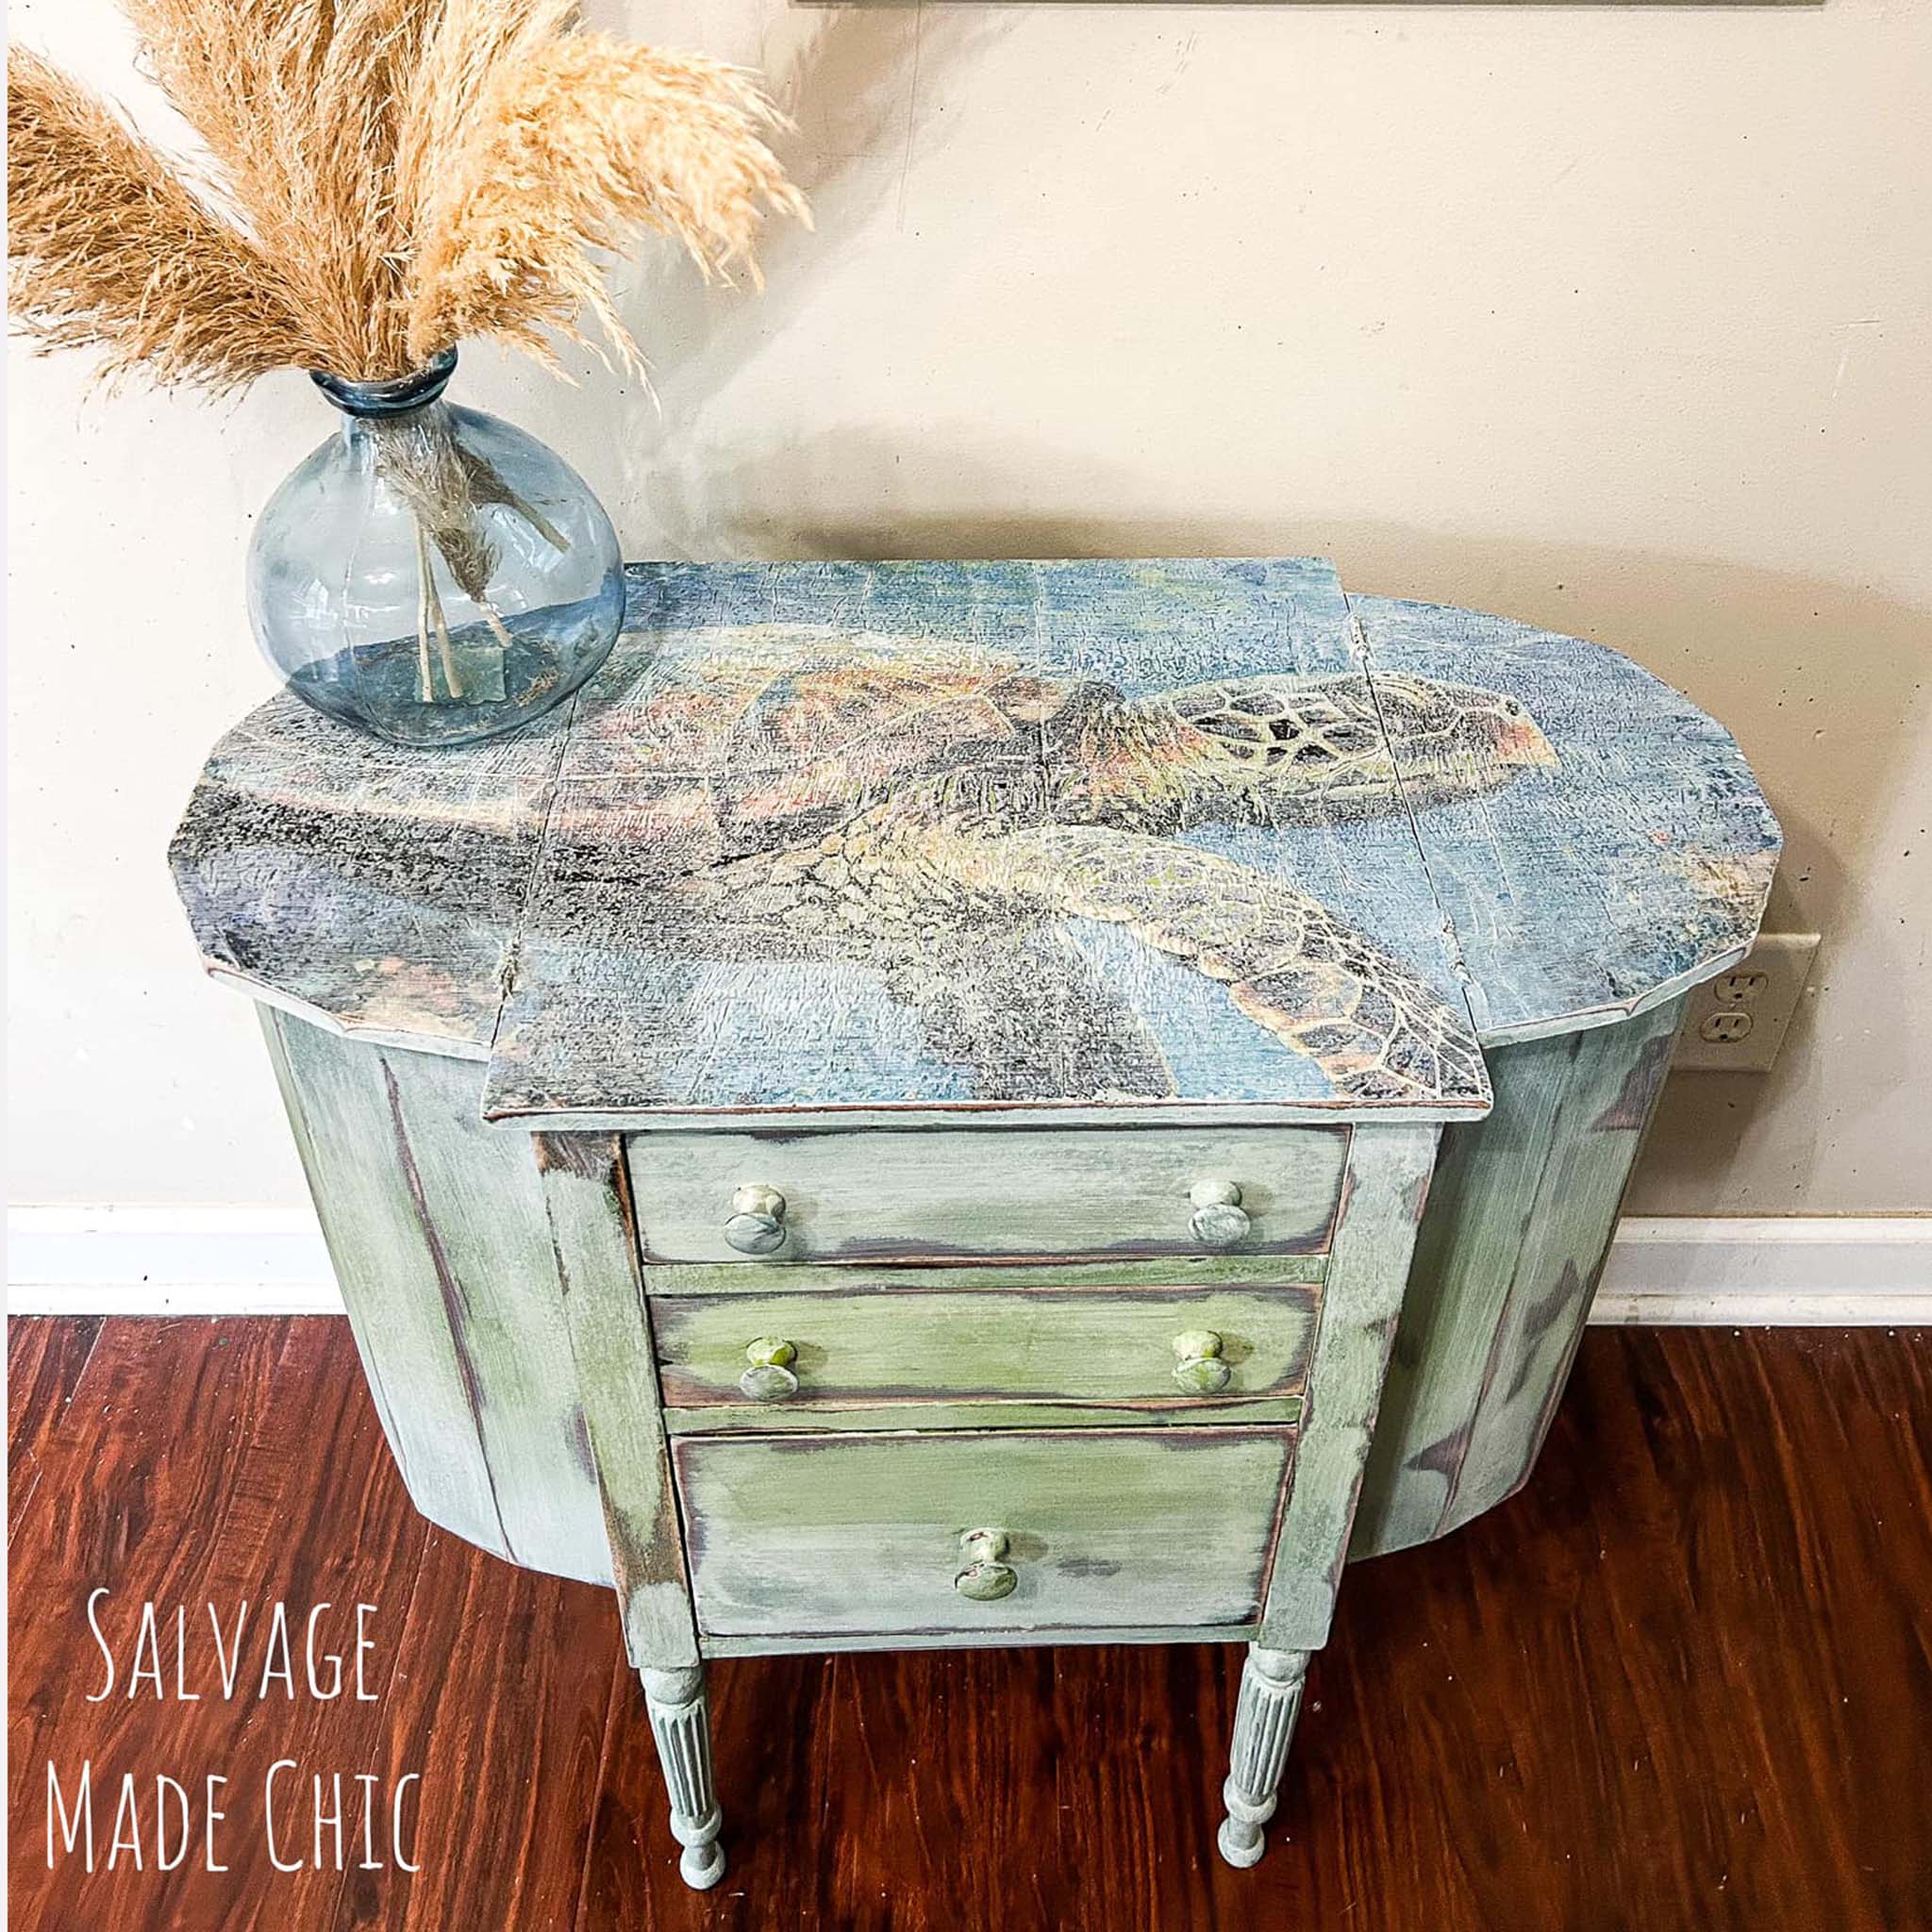 A vintage end table refurbished by Salvage Made Chic is painted a distressed pale green and features Whimsykel's Seymour tissue paper on the top. The tissue paper has been distressed as well.